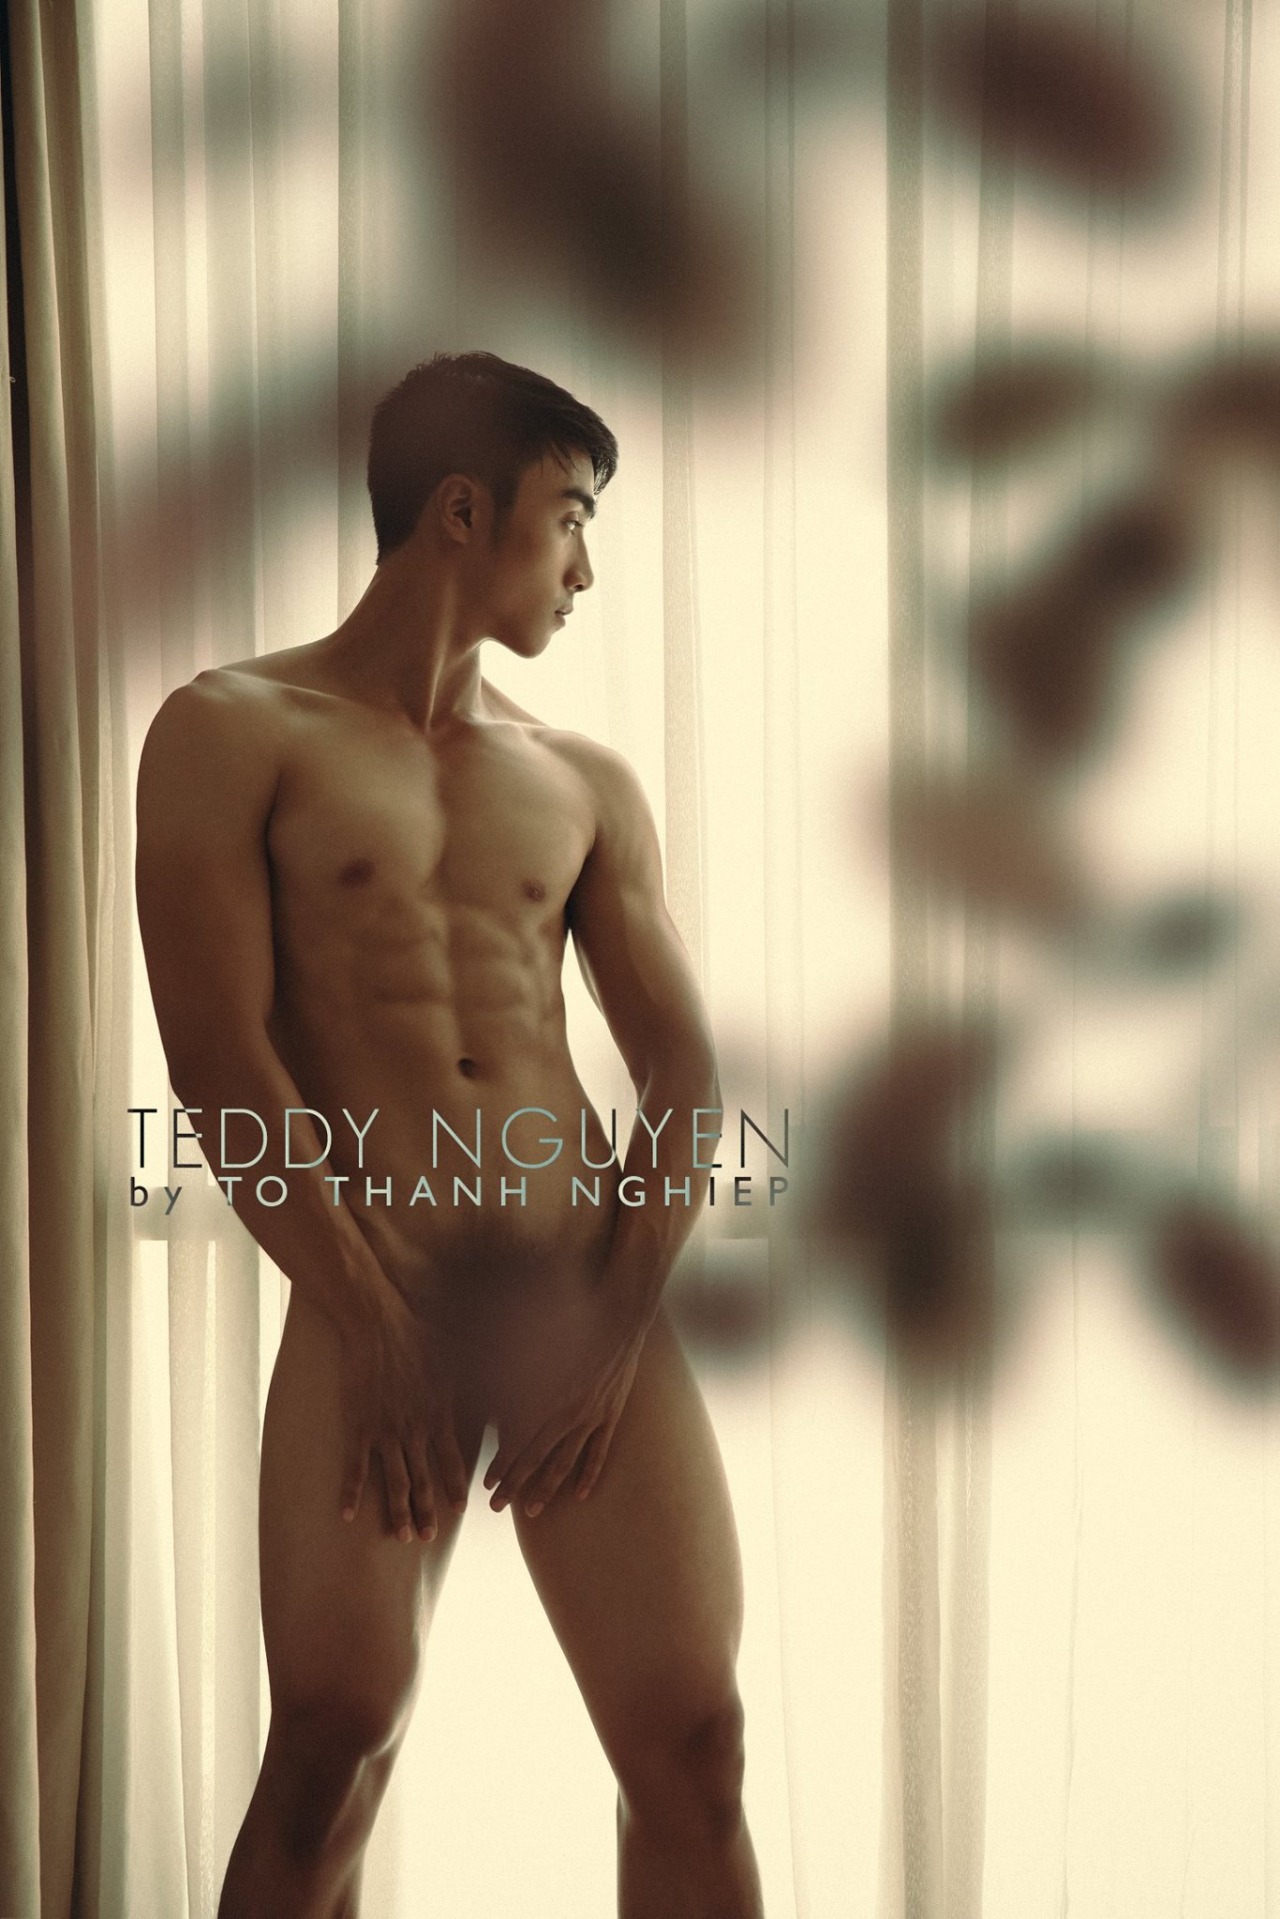 teddy-nguyen-by-to-thanh-nghiep-05.jpg